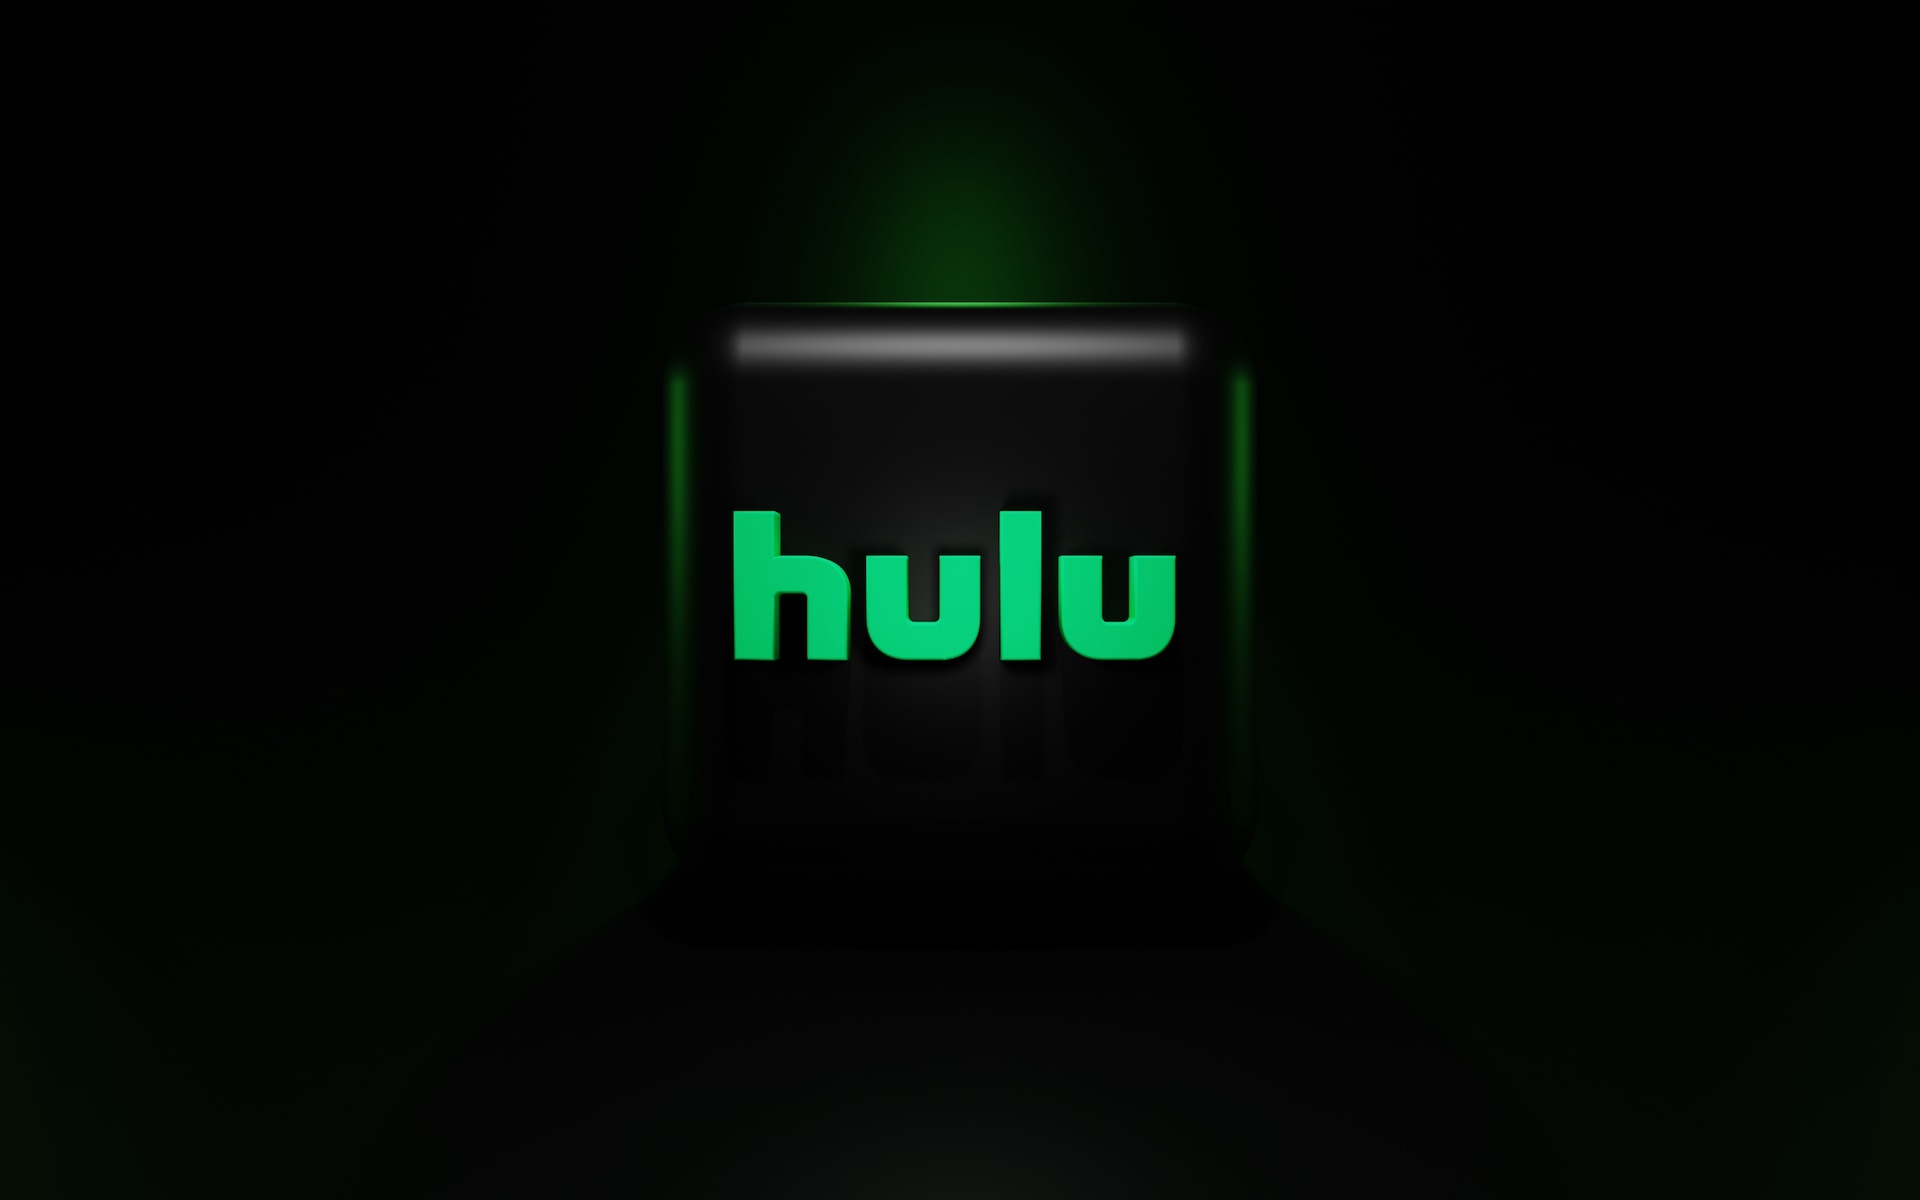 How Many Screens Can You Use Simultaneously on Hulu?